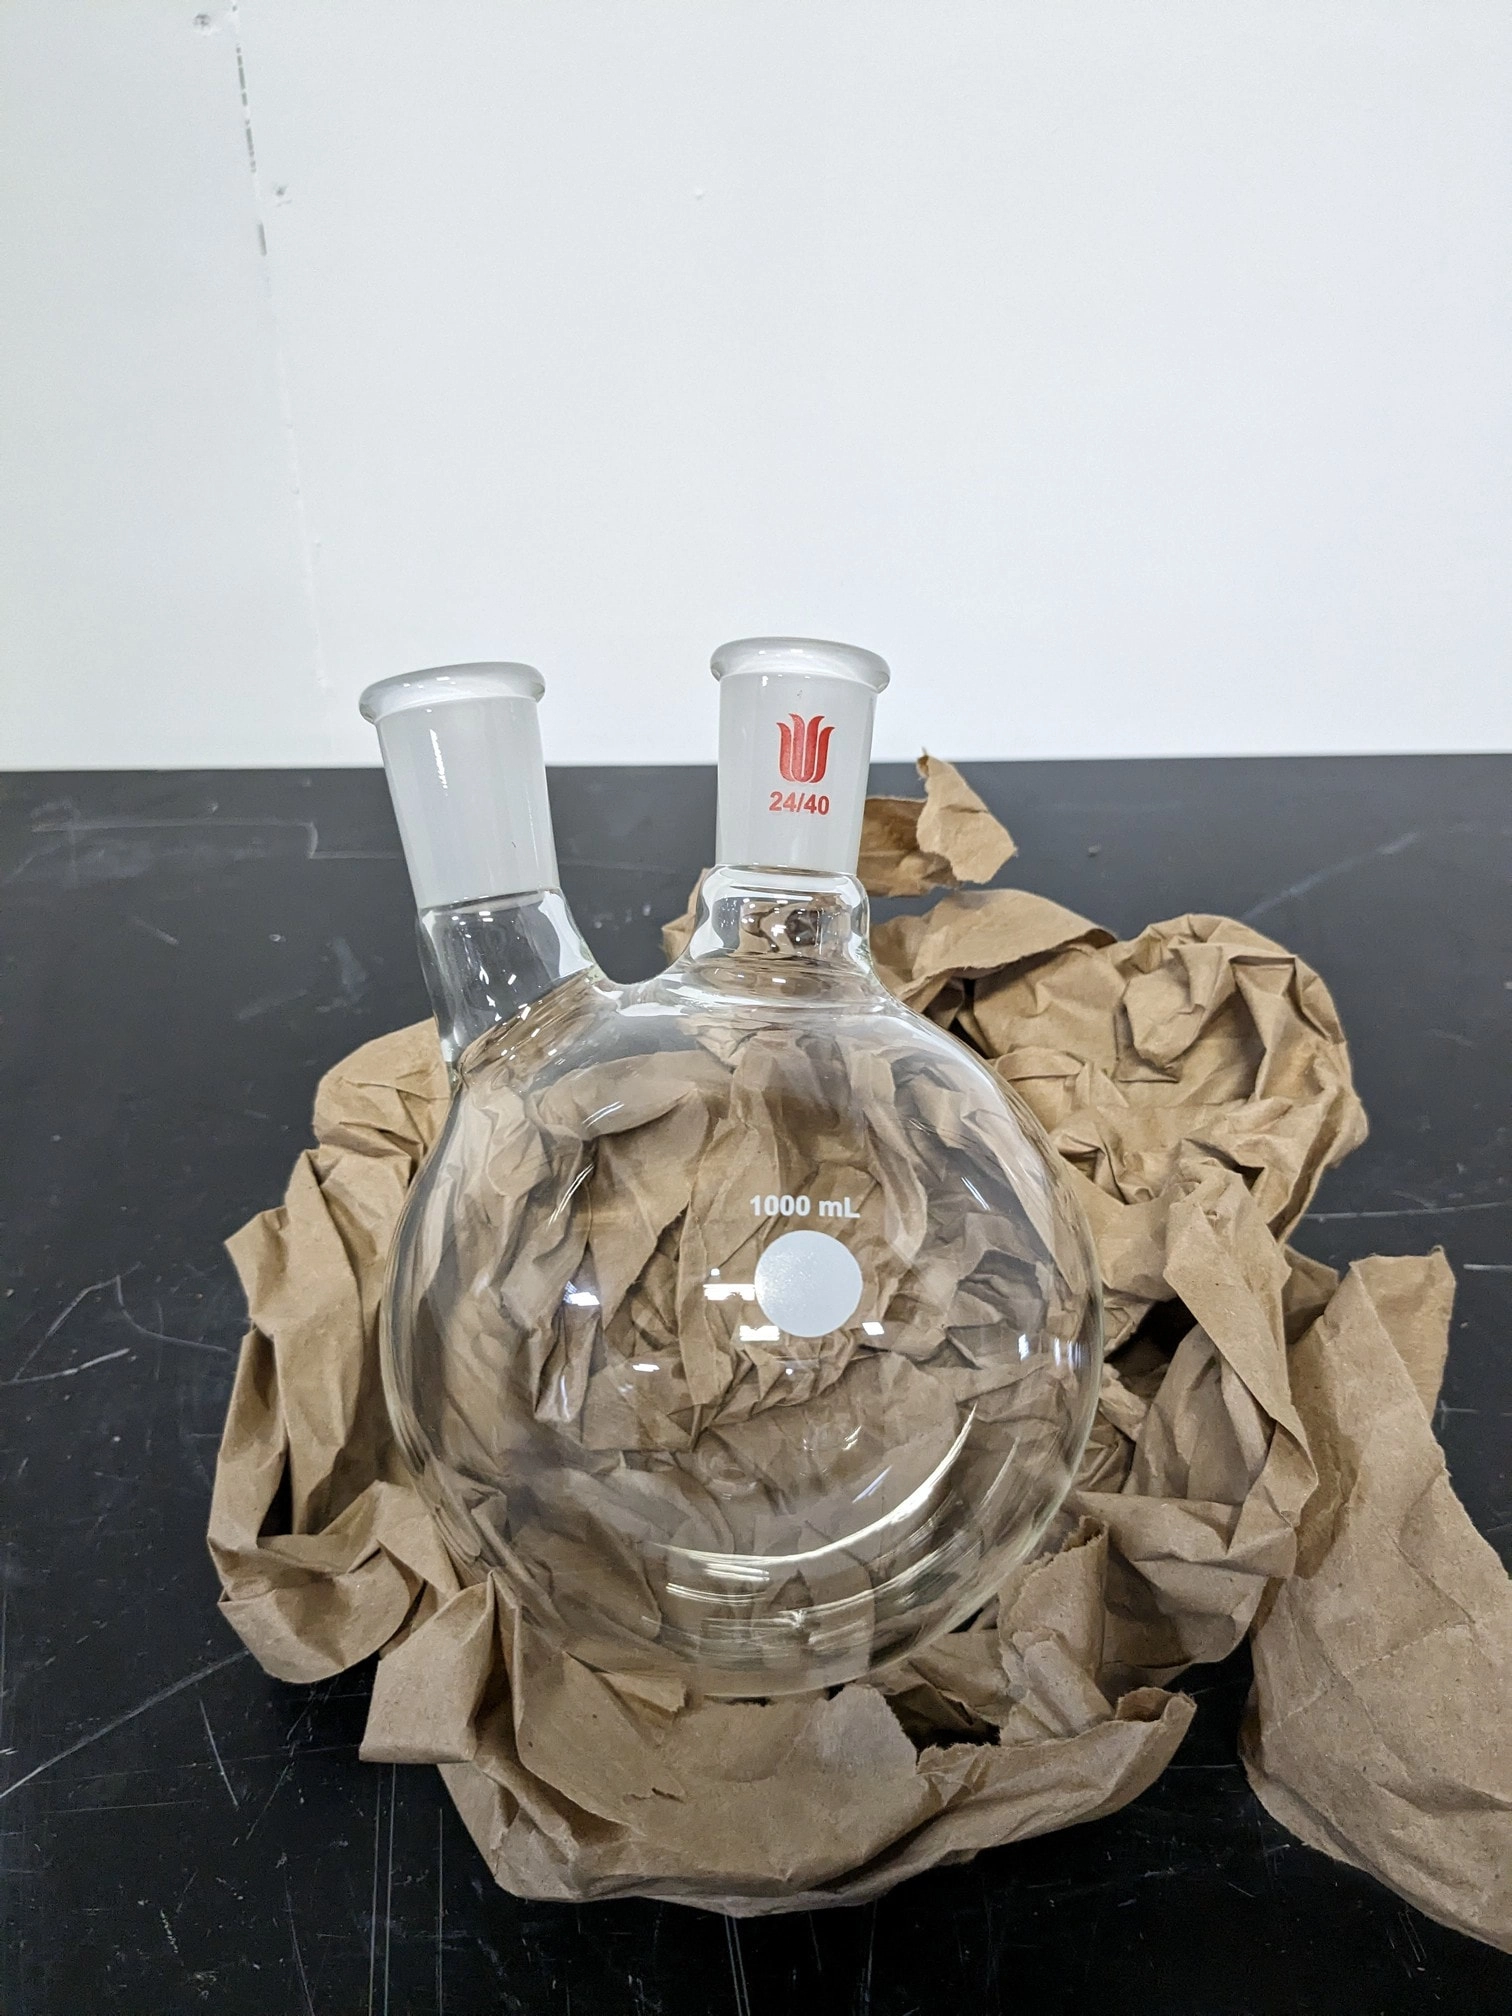 Two Neck Round Bottom Flask 1000 mL with 24/40 Joints